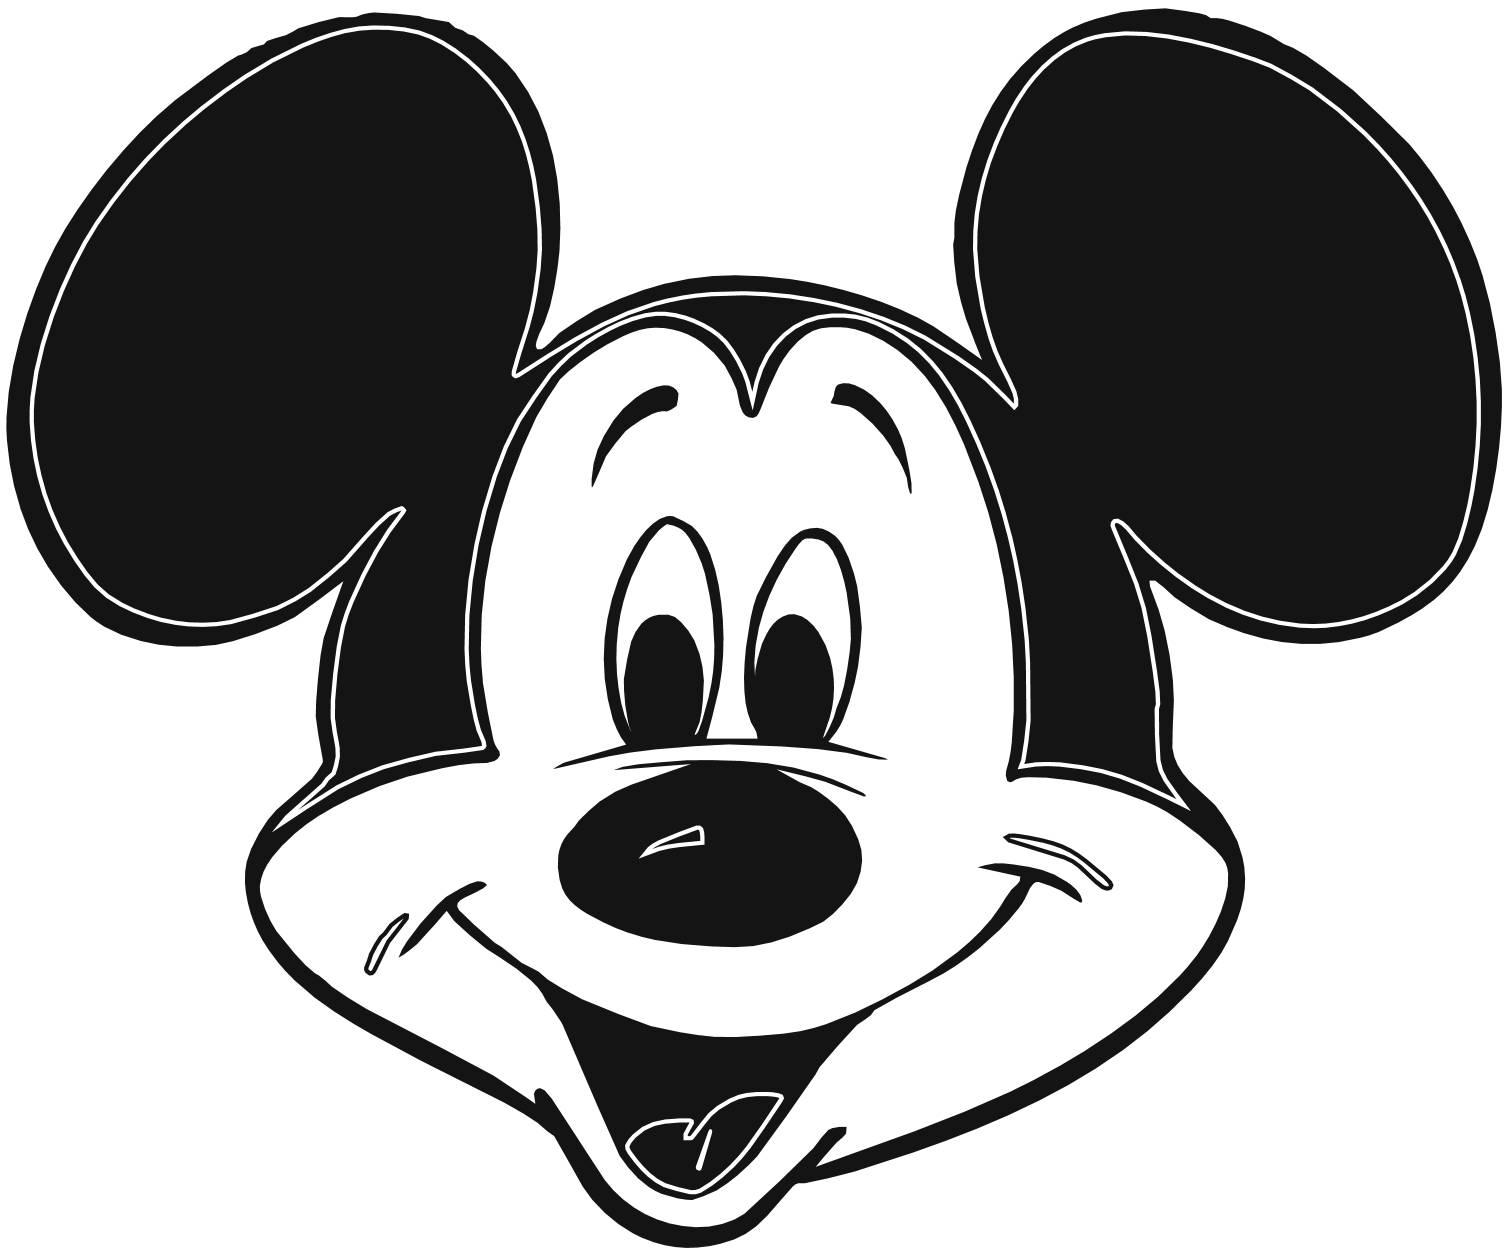 Mickey Mouse Cartoon 1260 Hd Wallpapers in Cartoons - Imagesci.